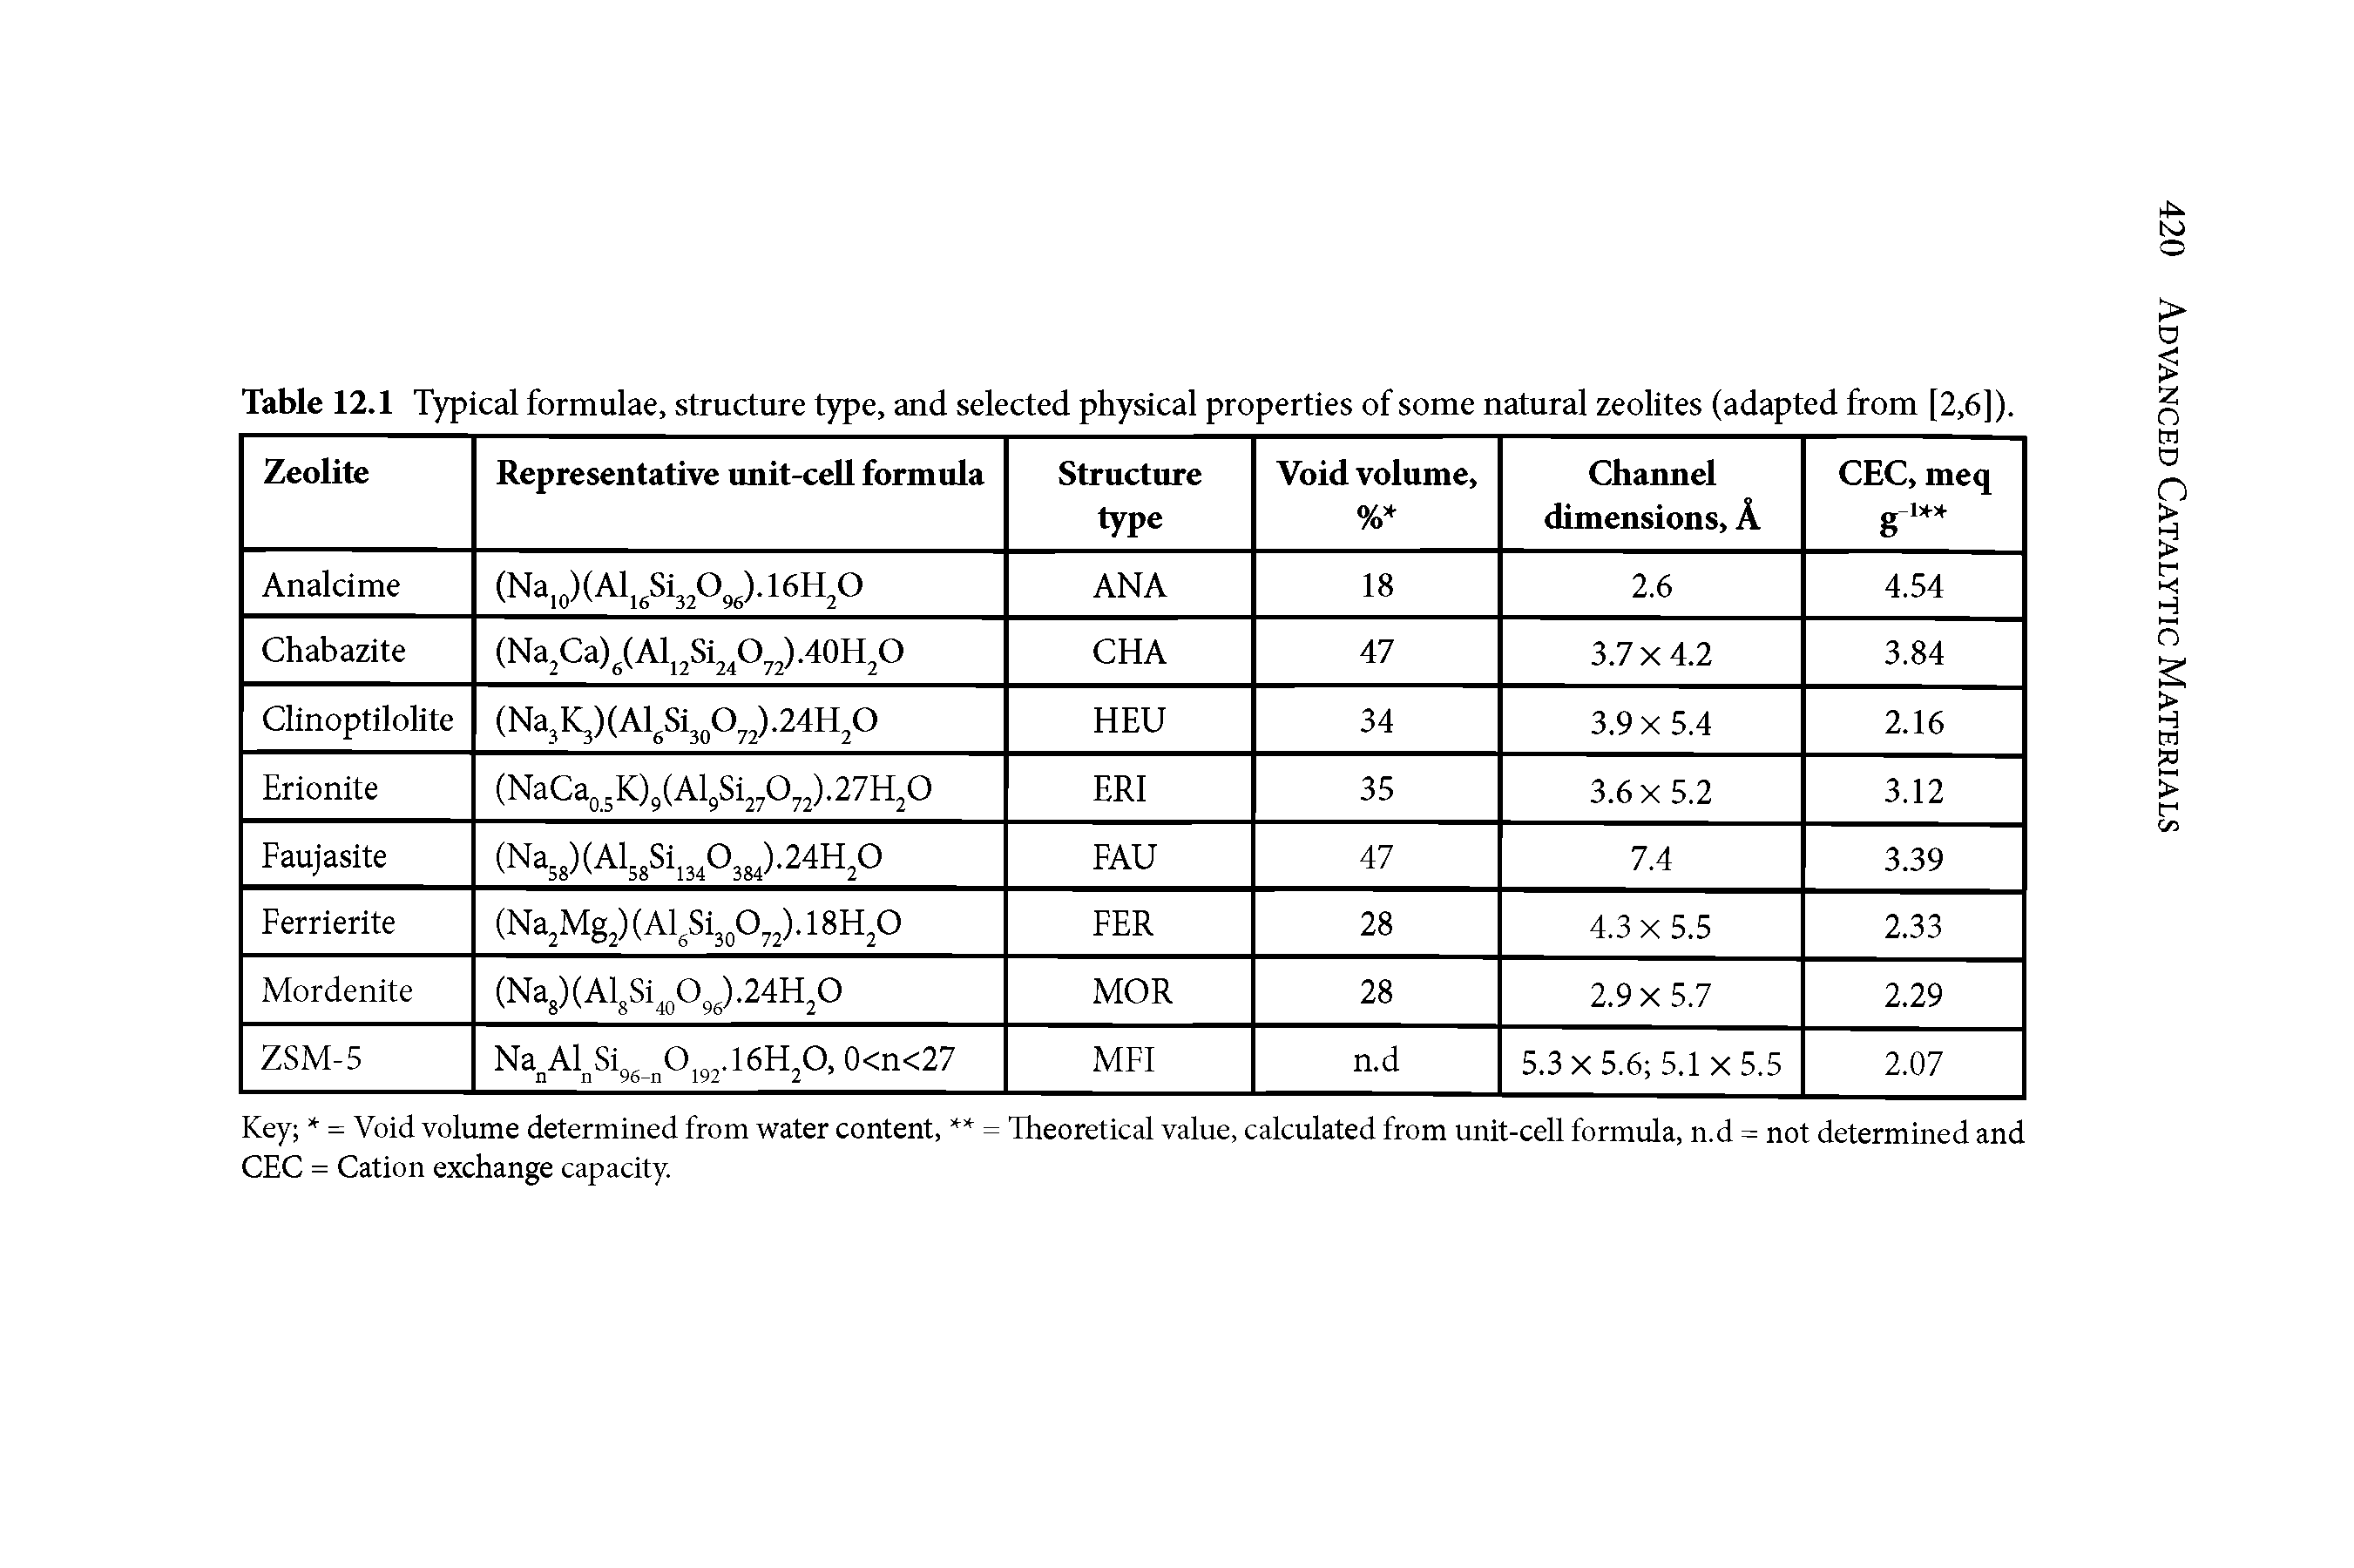 Table 12.1 Typical formulae, structure type, and selected physical properties of some natural zeolites (adapted from [2,6]).